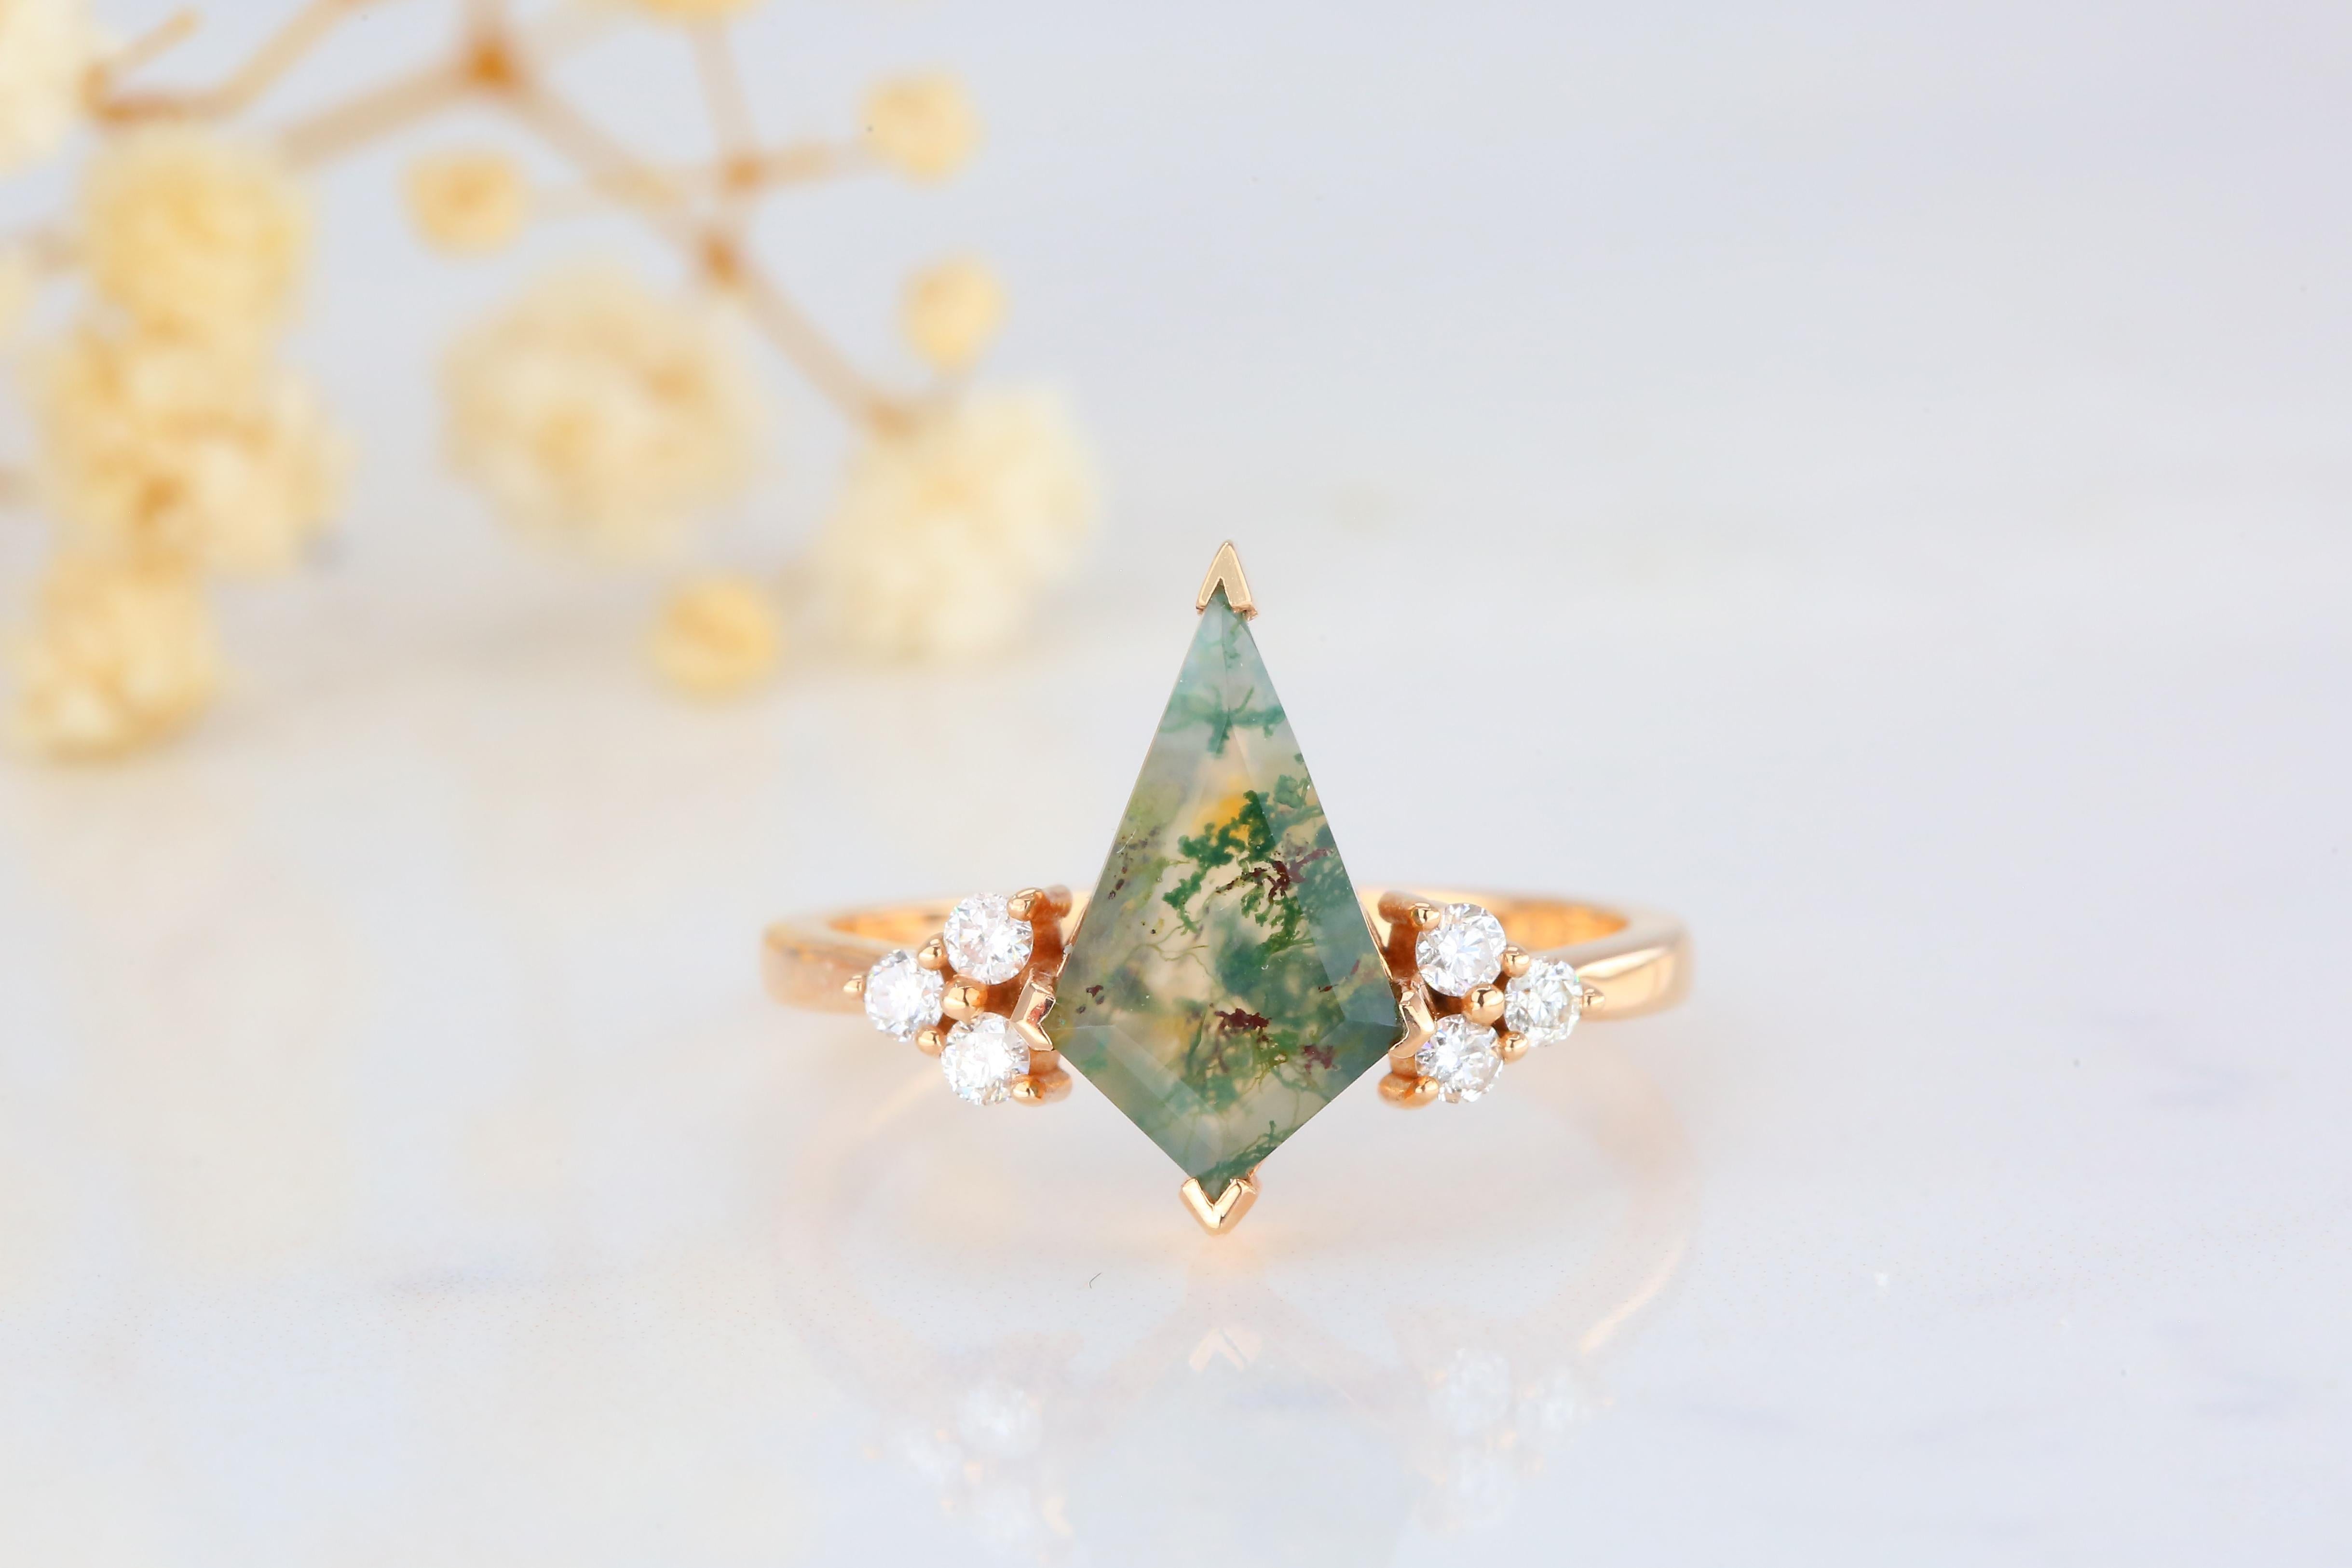 1.28 Ct. Moss Agate with Diamond Cocktail Ring, 14K Ring, created by hands from ring to the stone shapes. 

I used brillant special selection moss agate in vintage style for lovers of cocktail ring. I completed these in 14K solid excelent rose gold